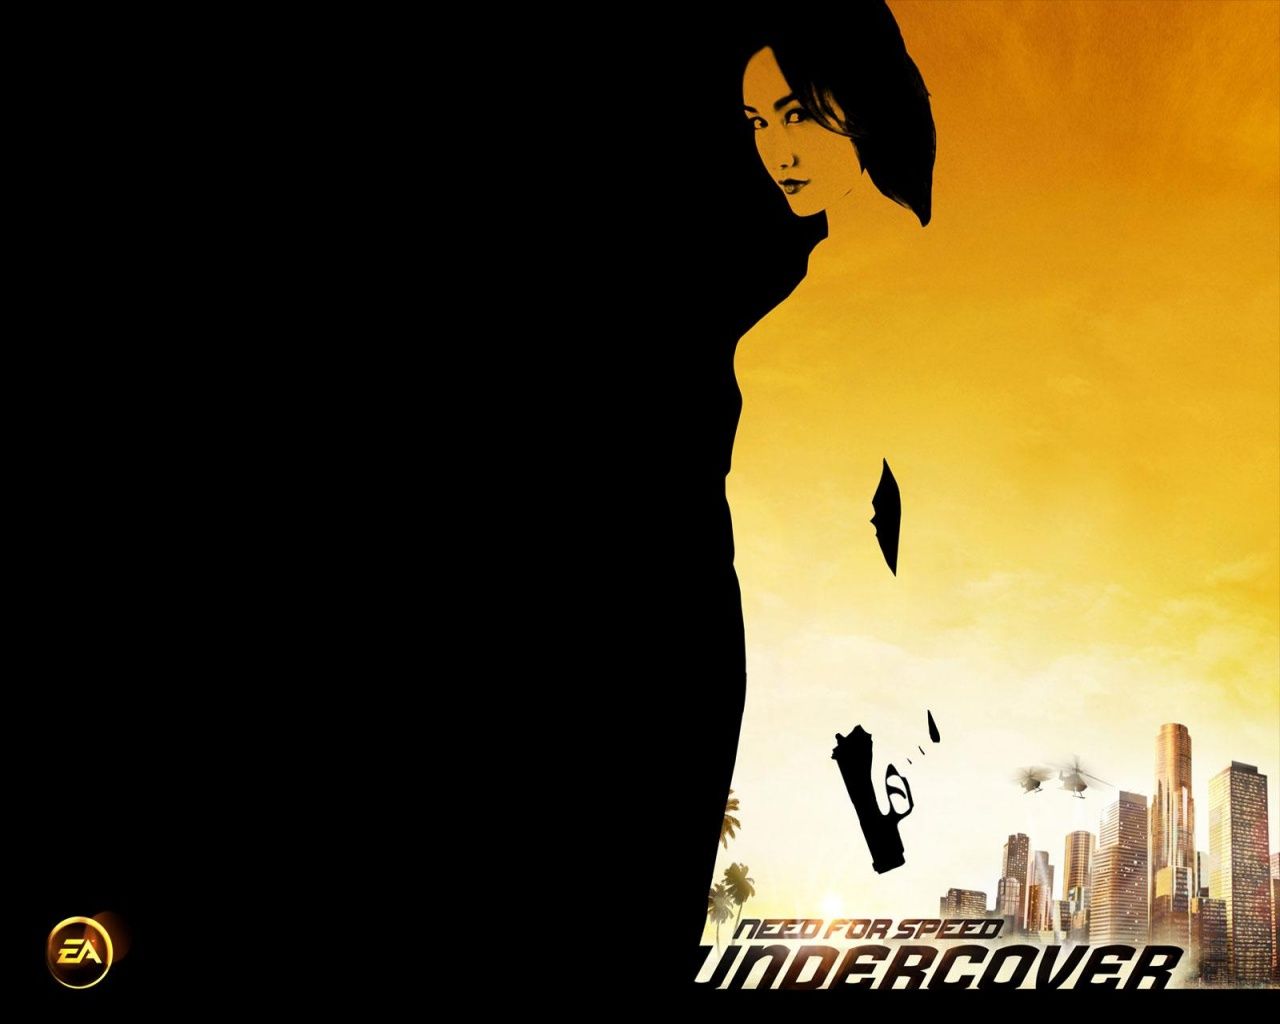 Maggie Q NFS Undercover Wallpaper in jpg format for free download